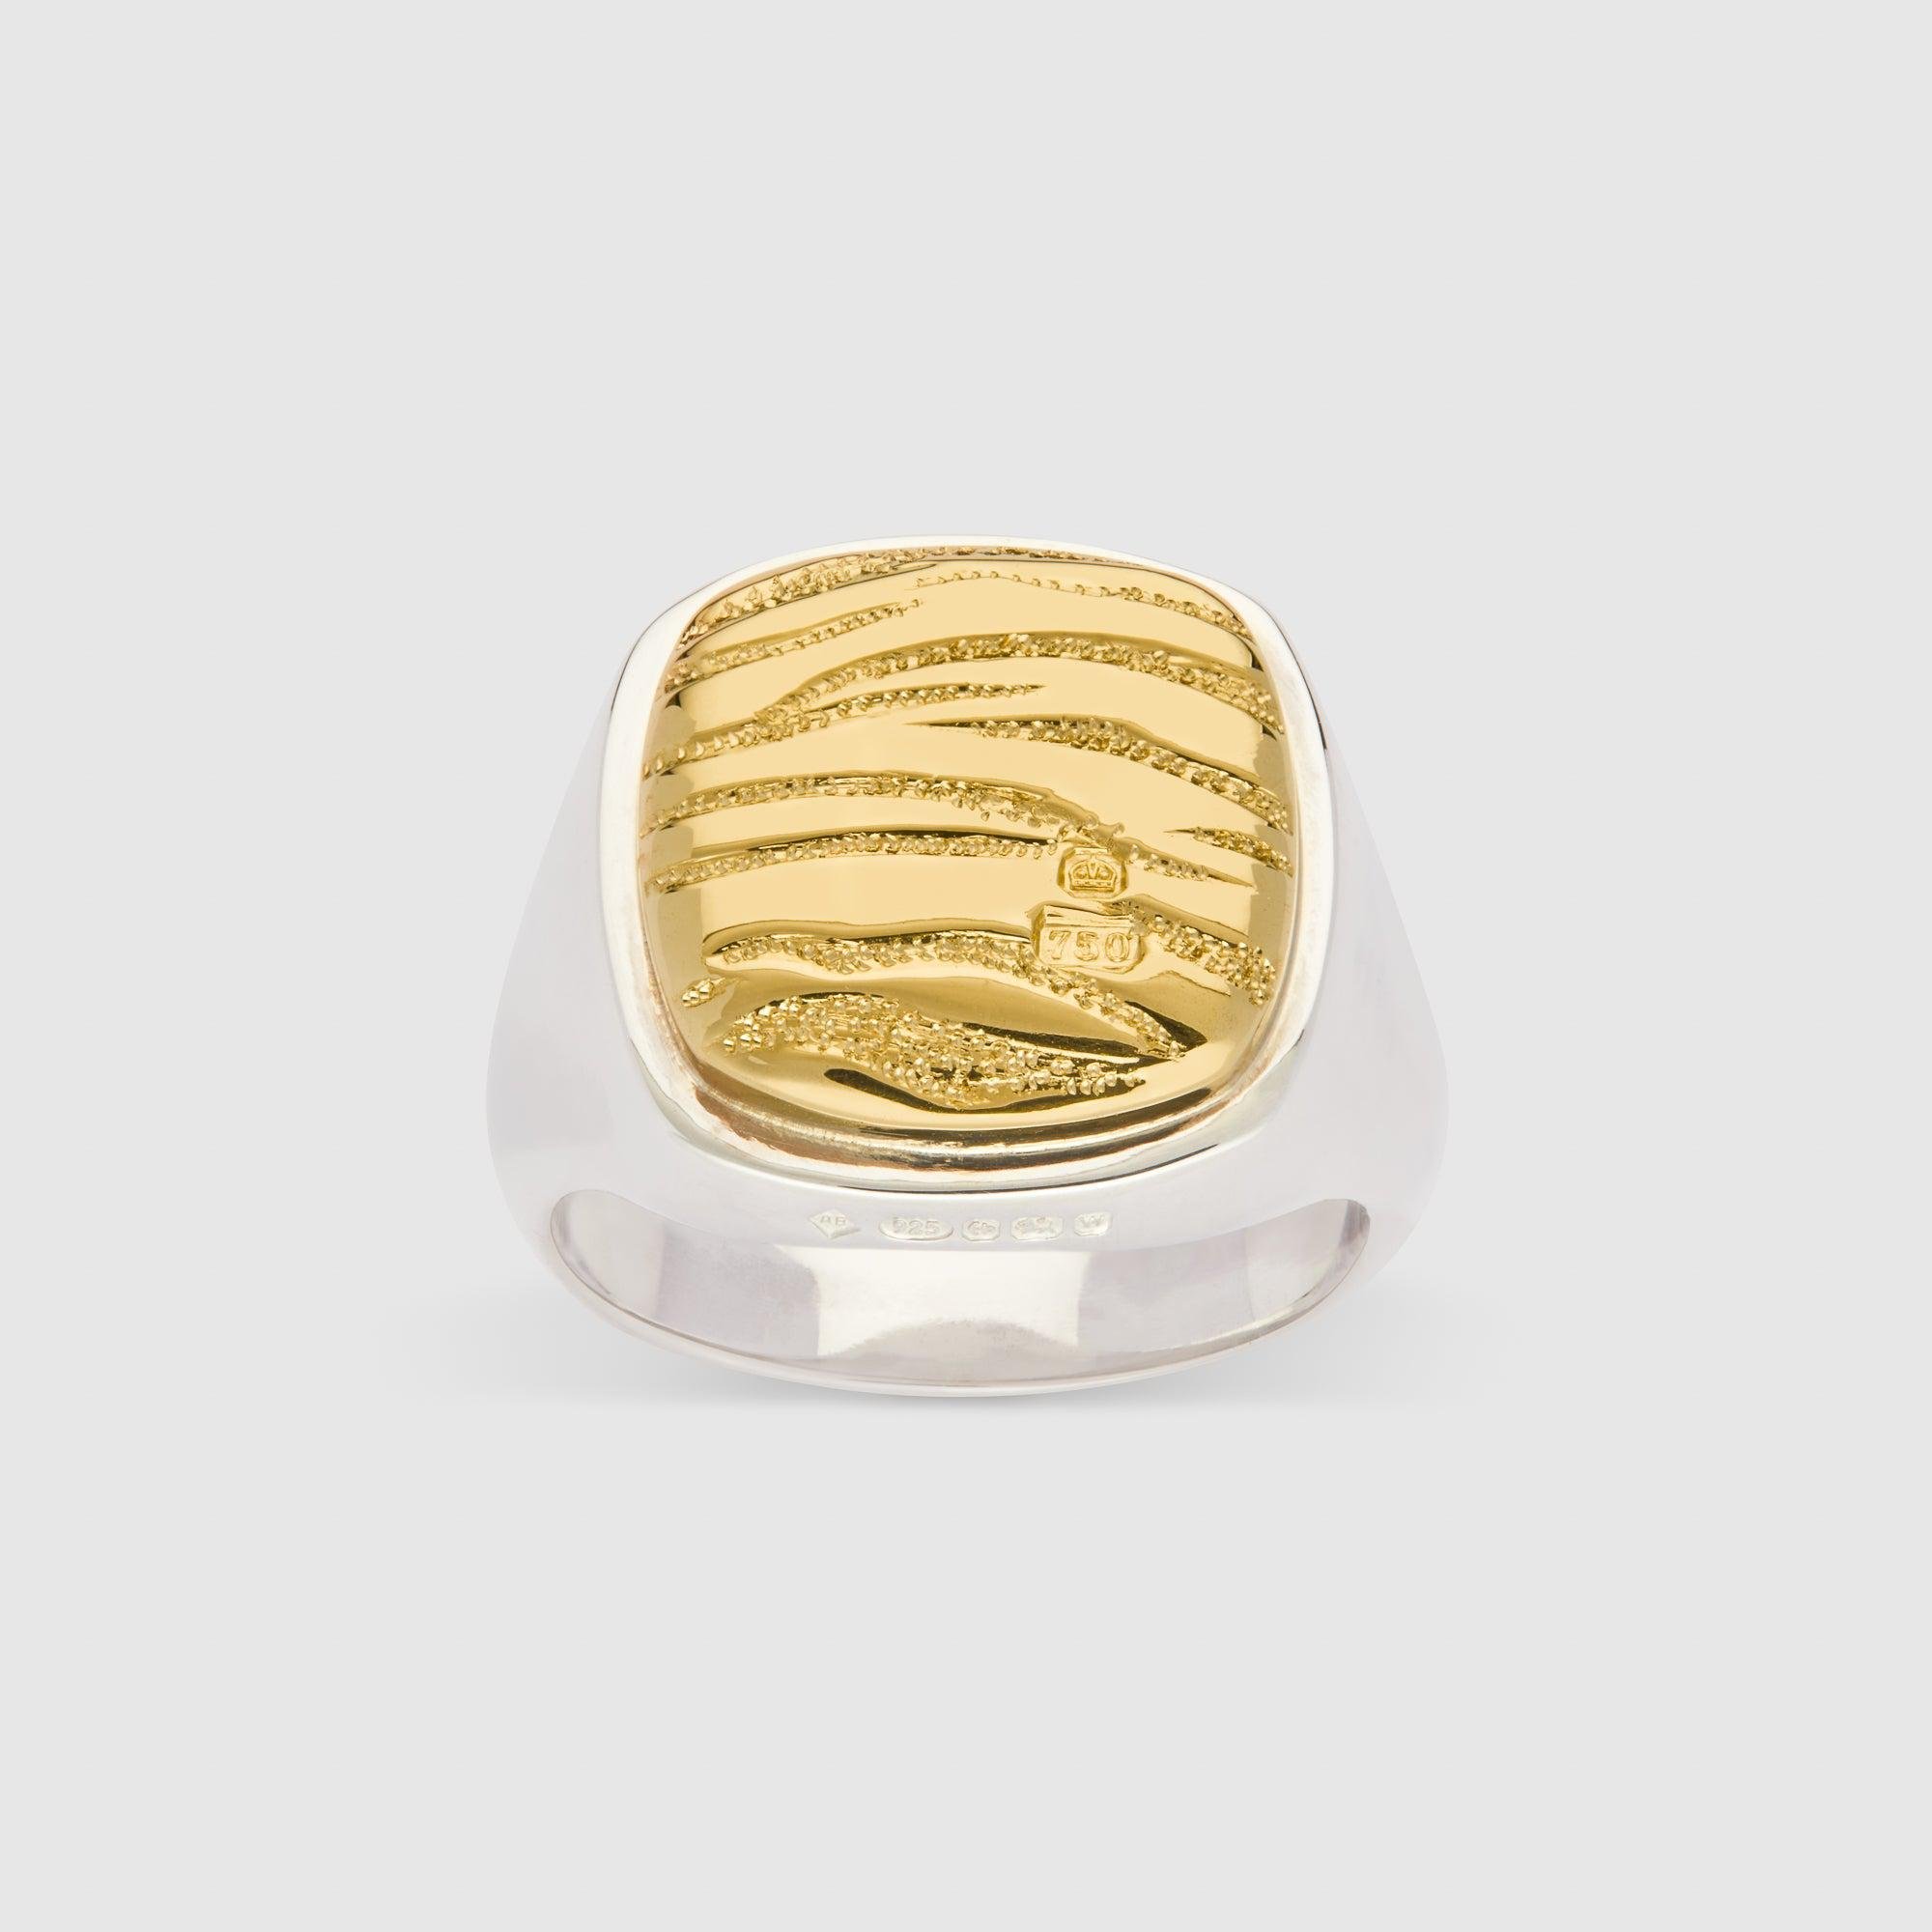 Bunney - DSM Exclusive Heavy Cushion Tiger Signet Ring by ANDREW BUNNEY